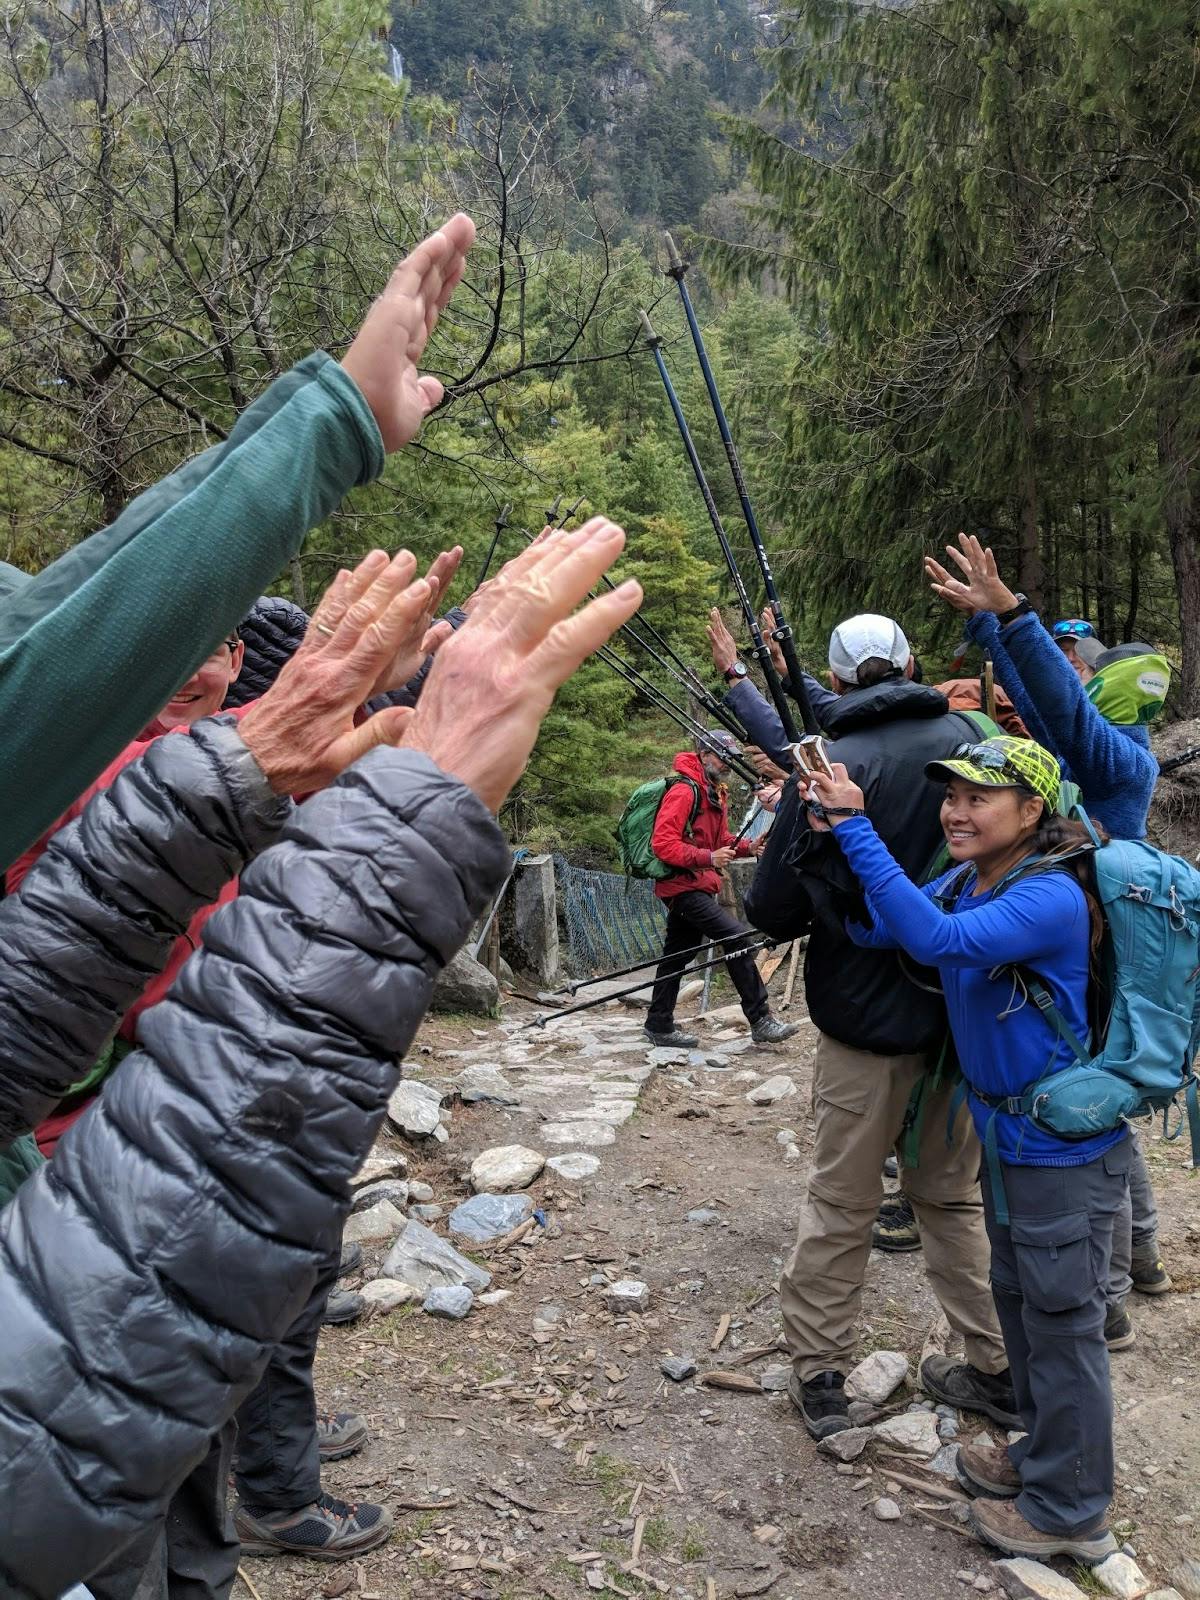 Group of hikers cheering one another on along the trail with their trekking sticks.